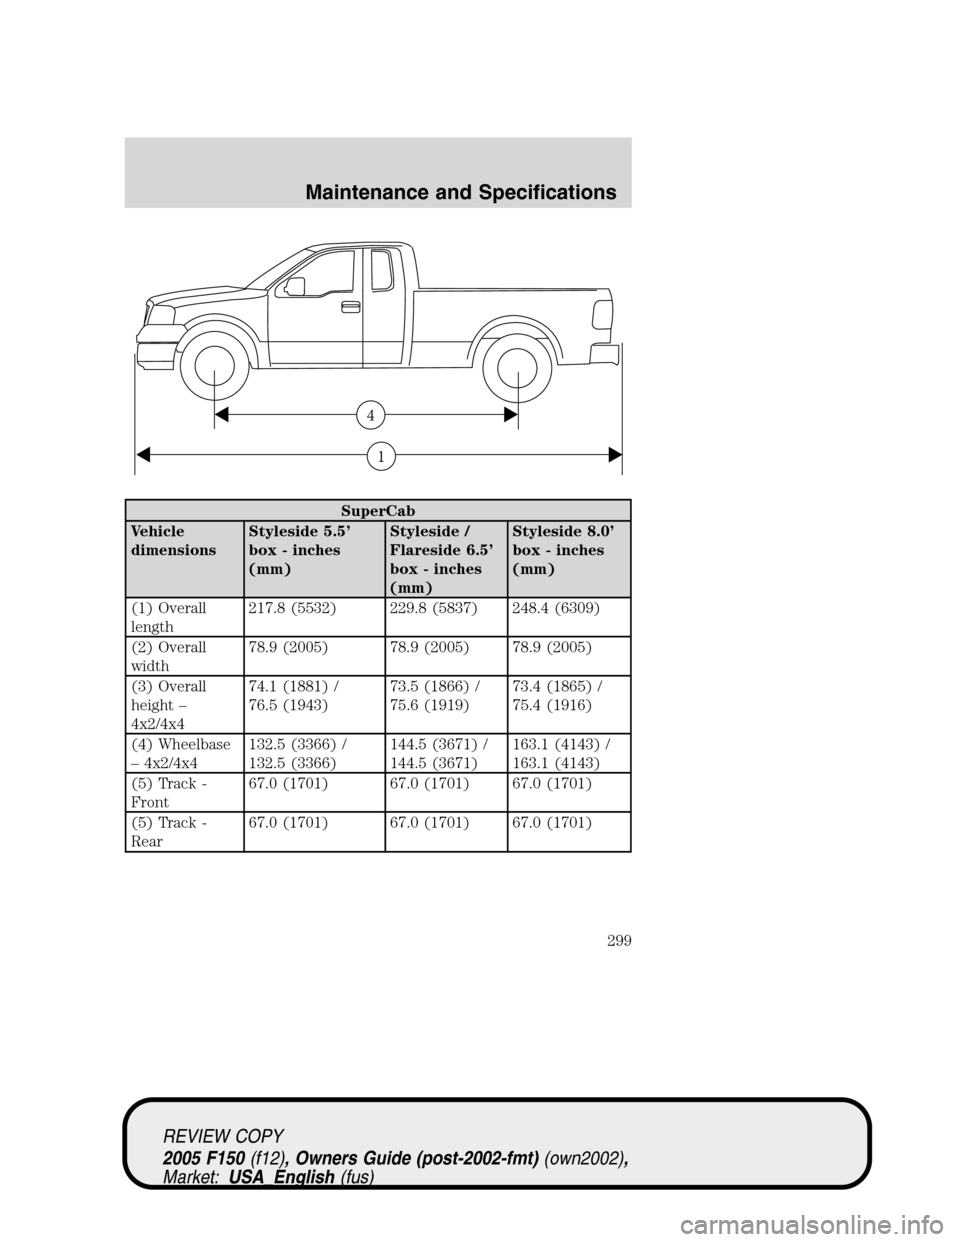 FORD F150 2005 11.G Owners Manual SuperCab
Vehicle
dimensionsStyleside 5.5’
box - inches
(mm)Styleside /
Flareside 6.5’
box - inches
(mm)Styleside 8.0’
box - inches
(mm)
(1) Overall
length217.8 (5532) 229.8 (5837) 248.4 (6309)
(